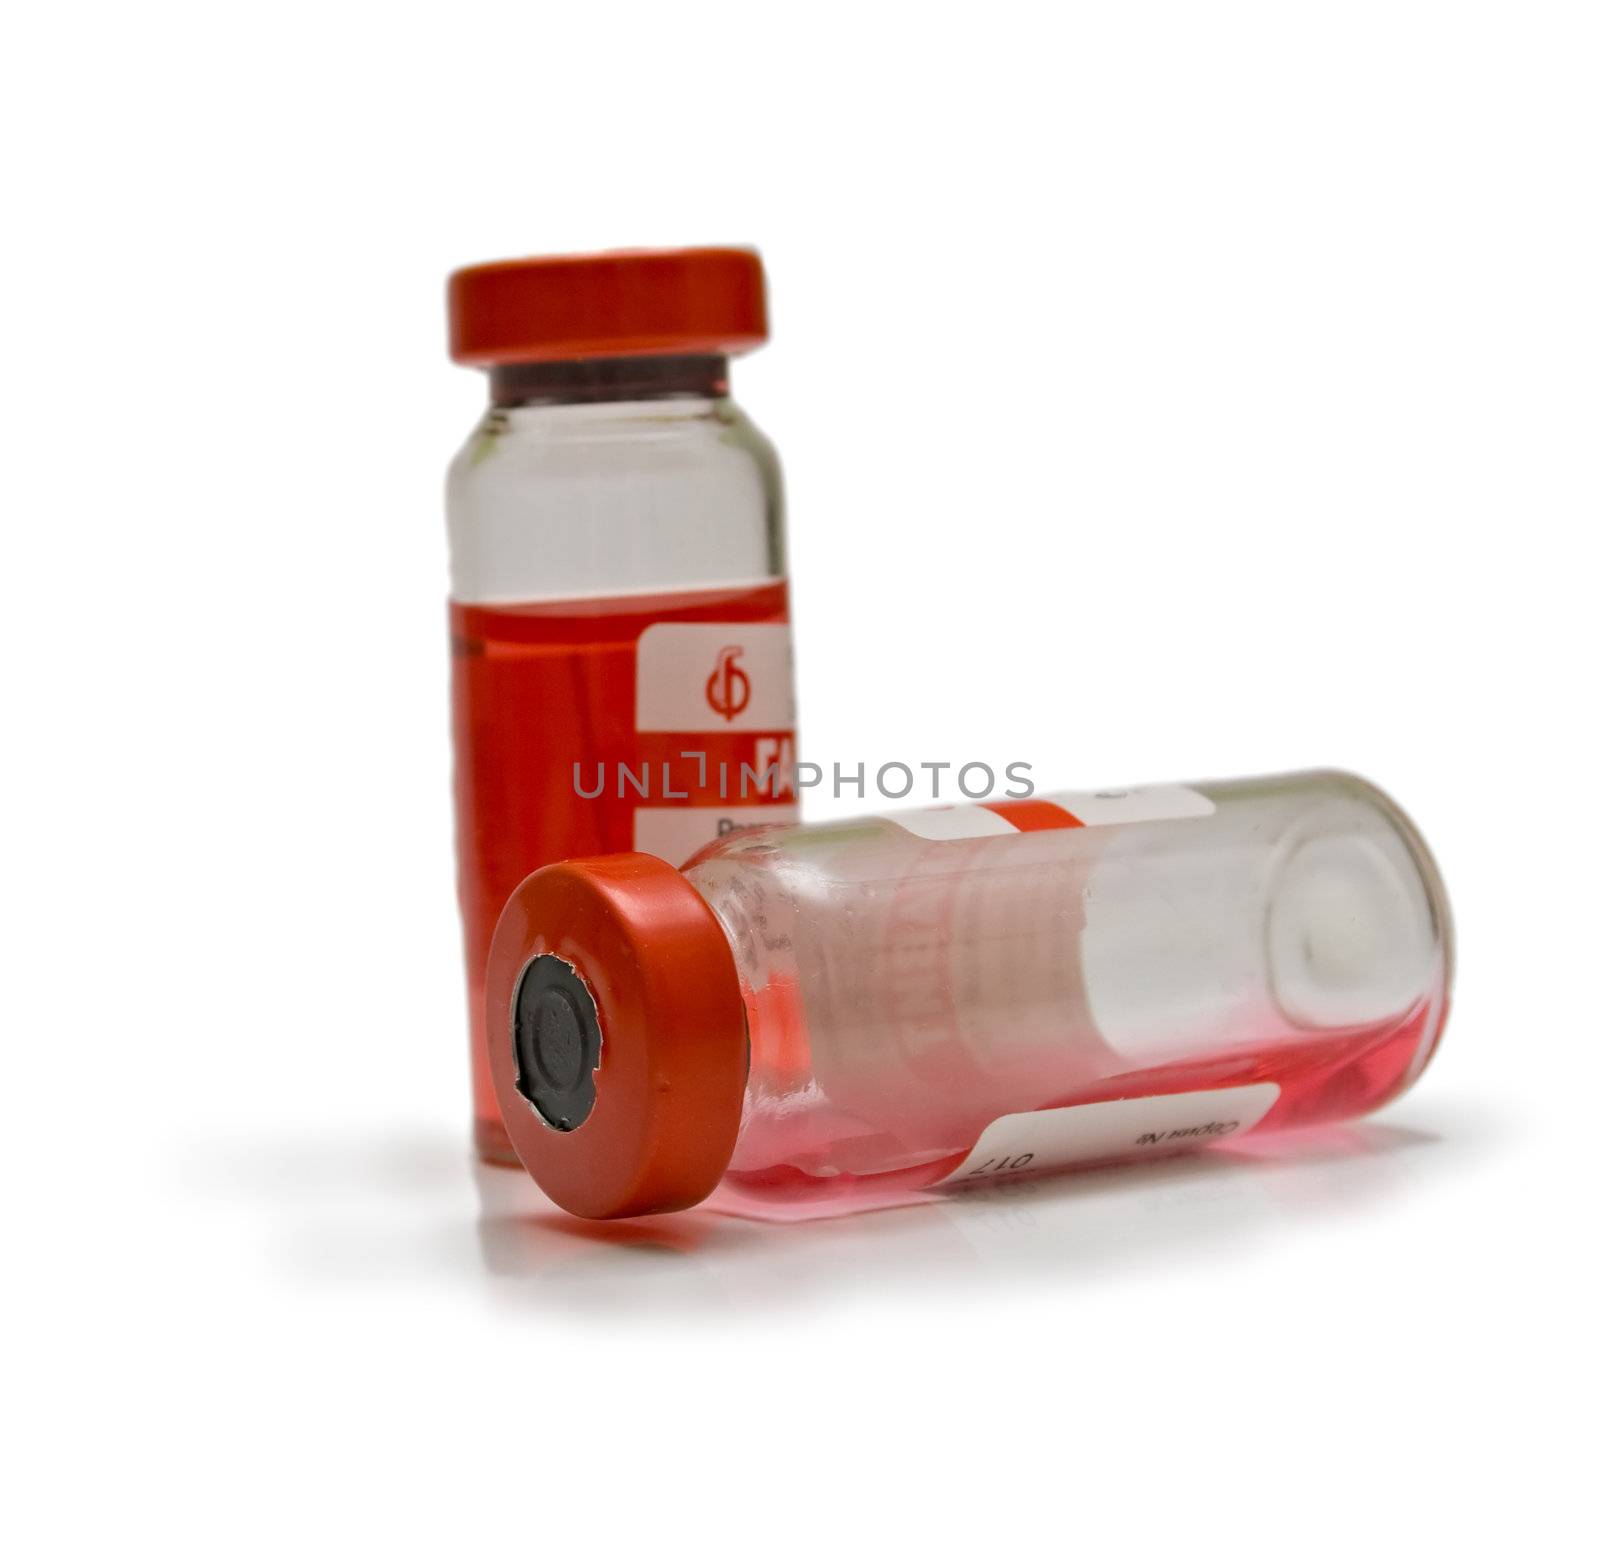 Transparent ampoules with a red medicine on a white background. Isolation. Shallow DOF